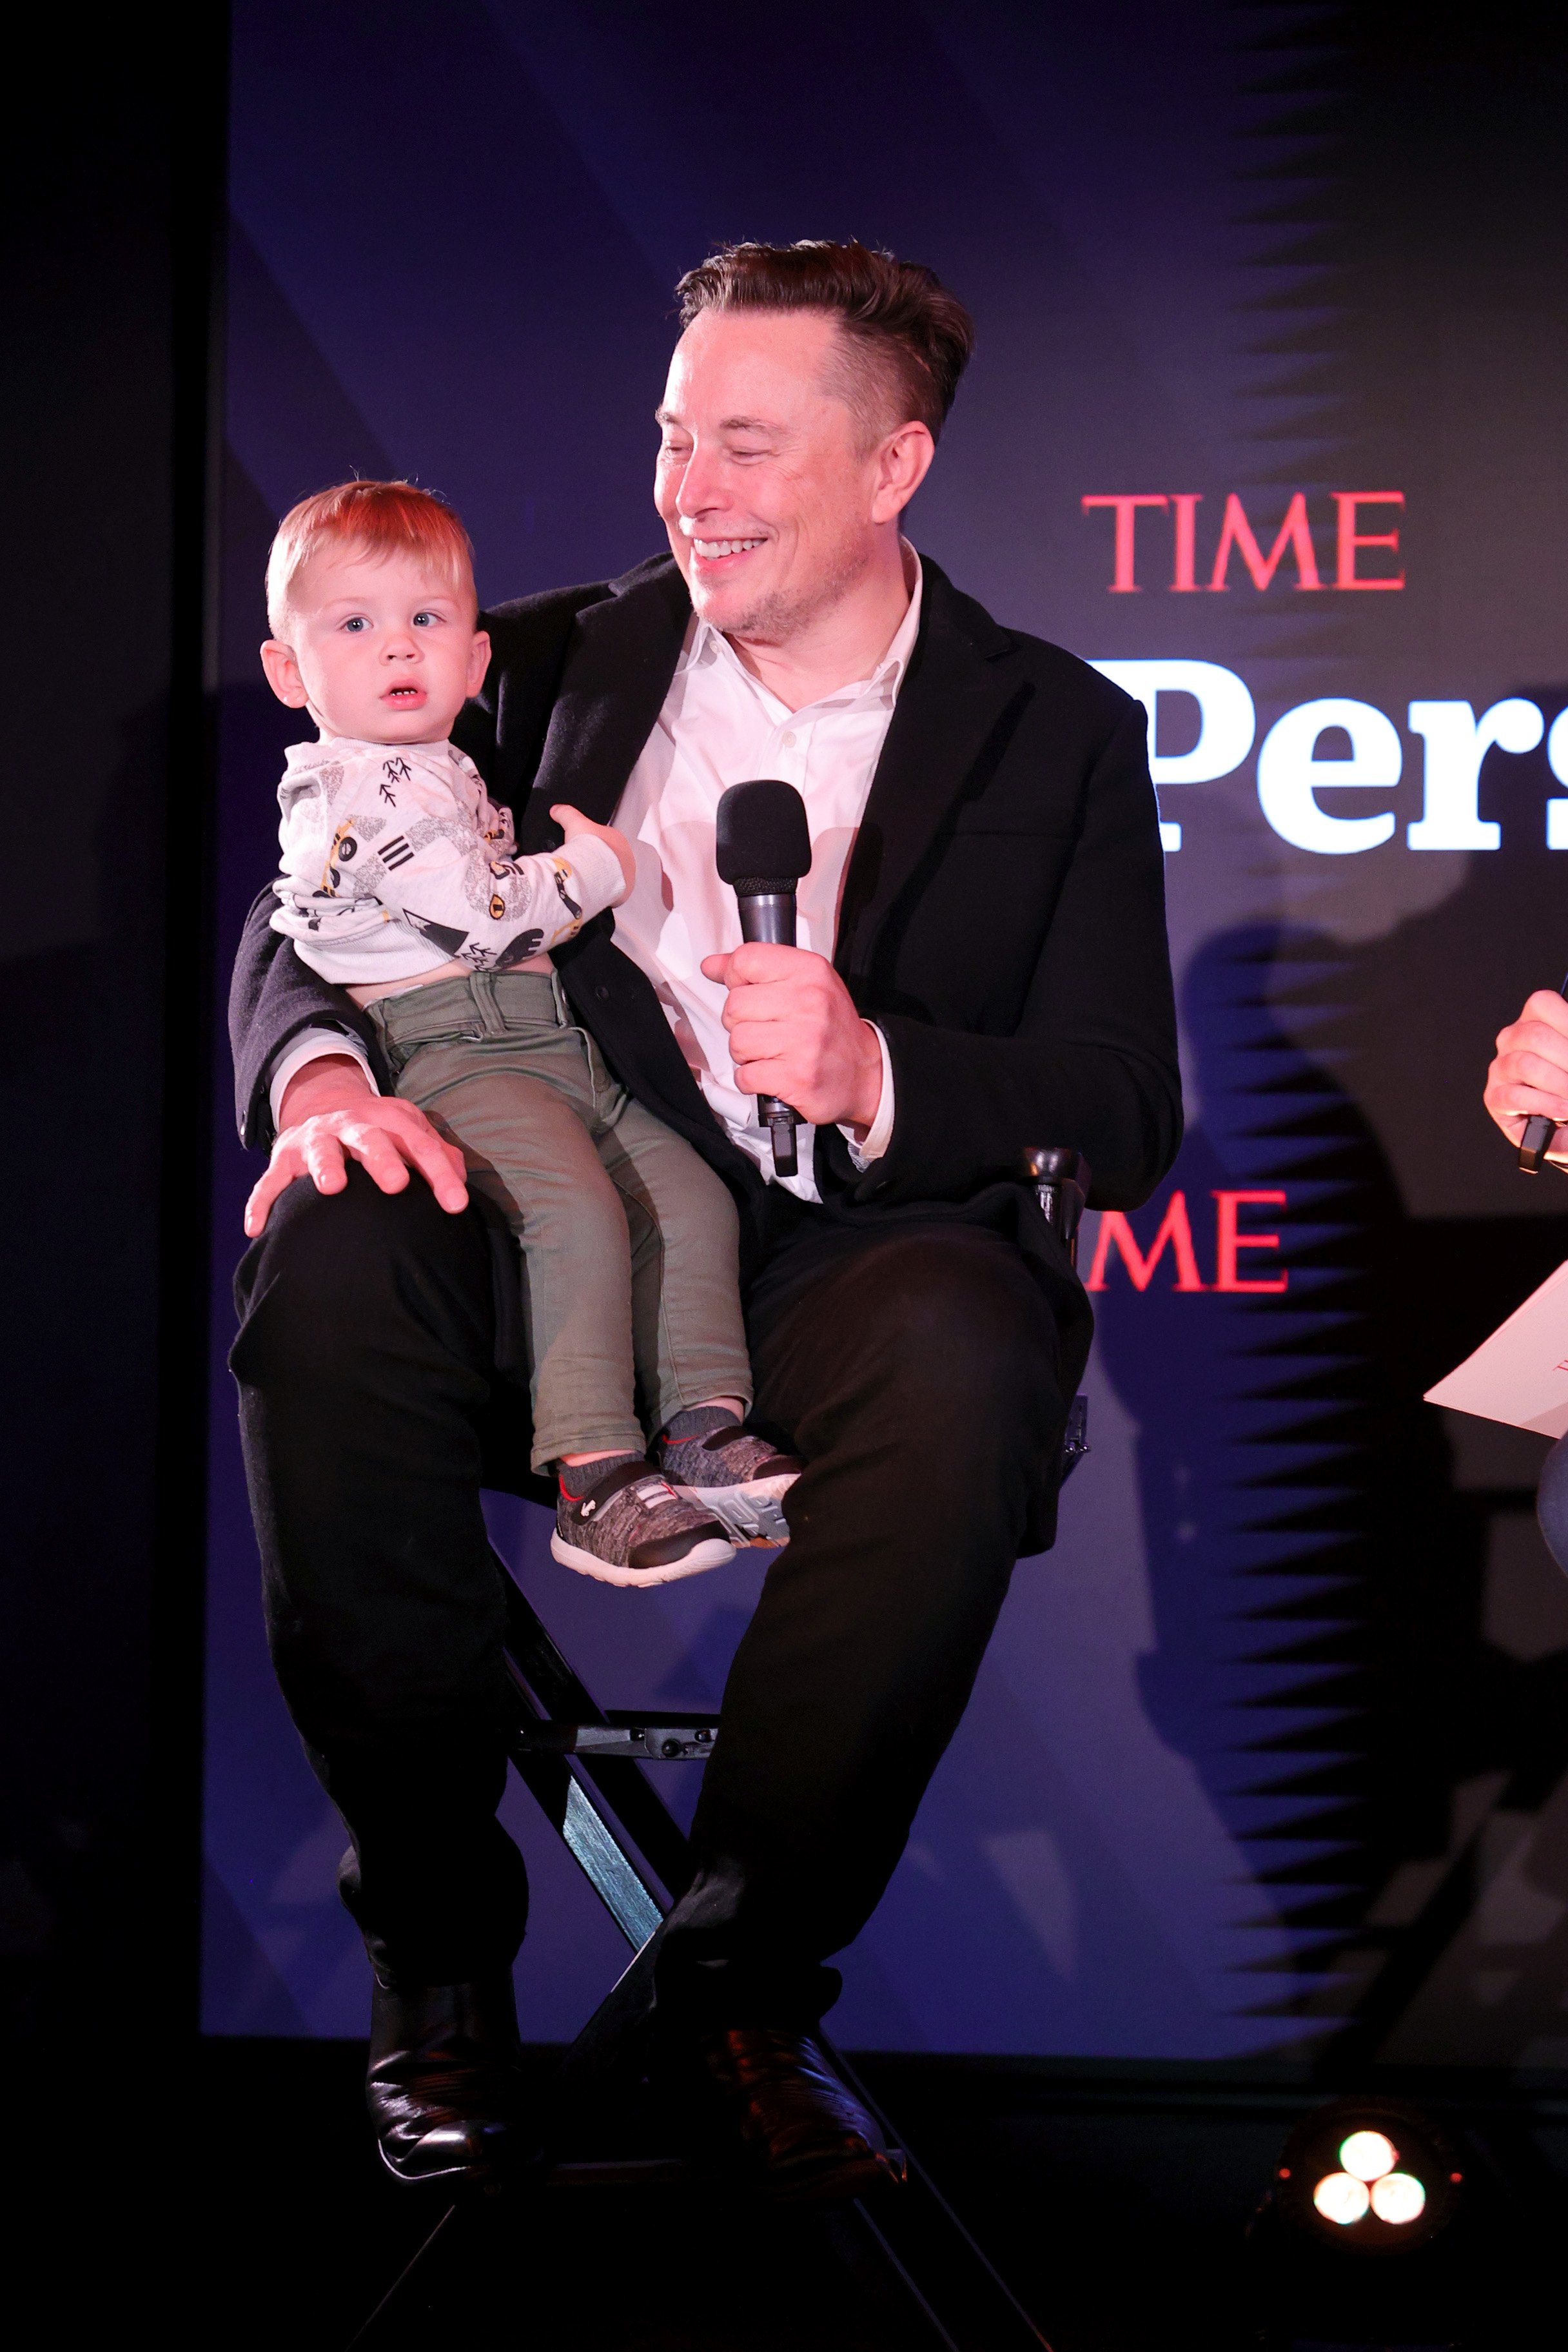 Elon Musk and son X Æ A-12 are pictured on stage at TIME Person of the Year on December 13, 2021, in New York City | Source: Getty Images